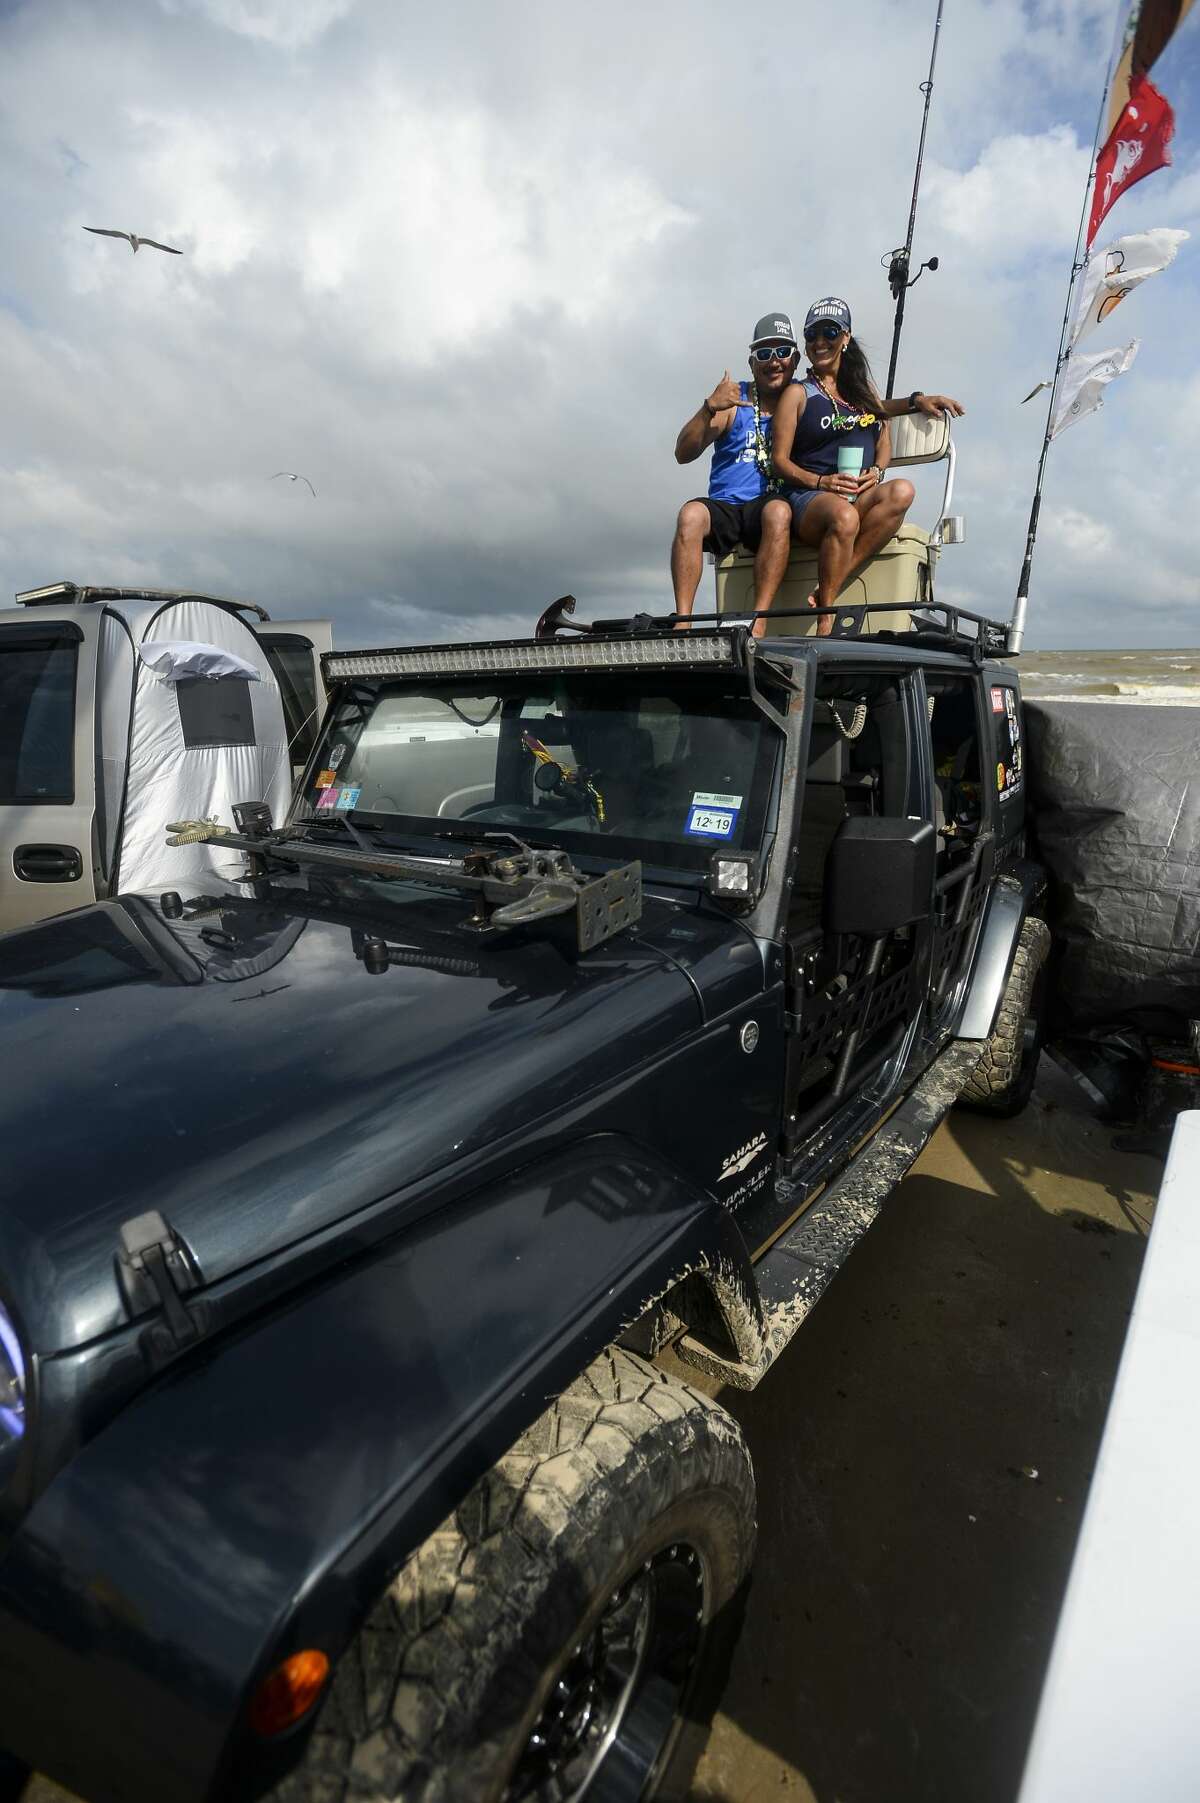 Over 100 Arrests Made During Go Topless Weekend In Galveston 